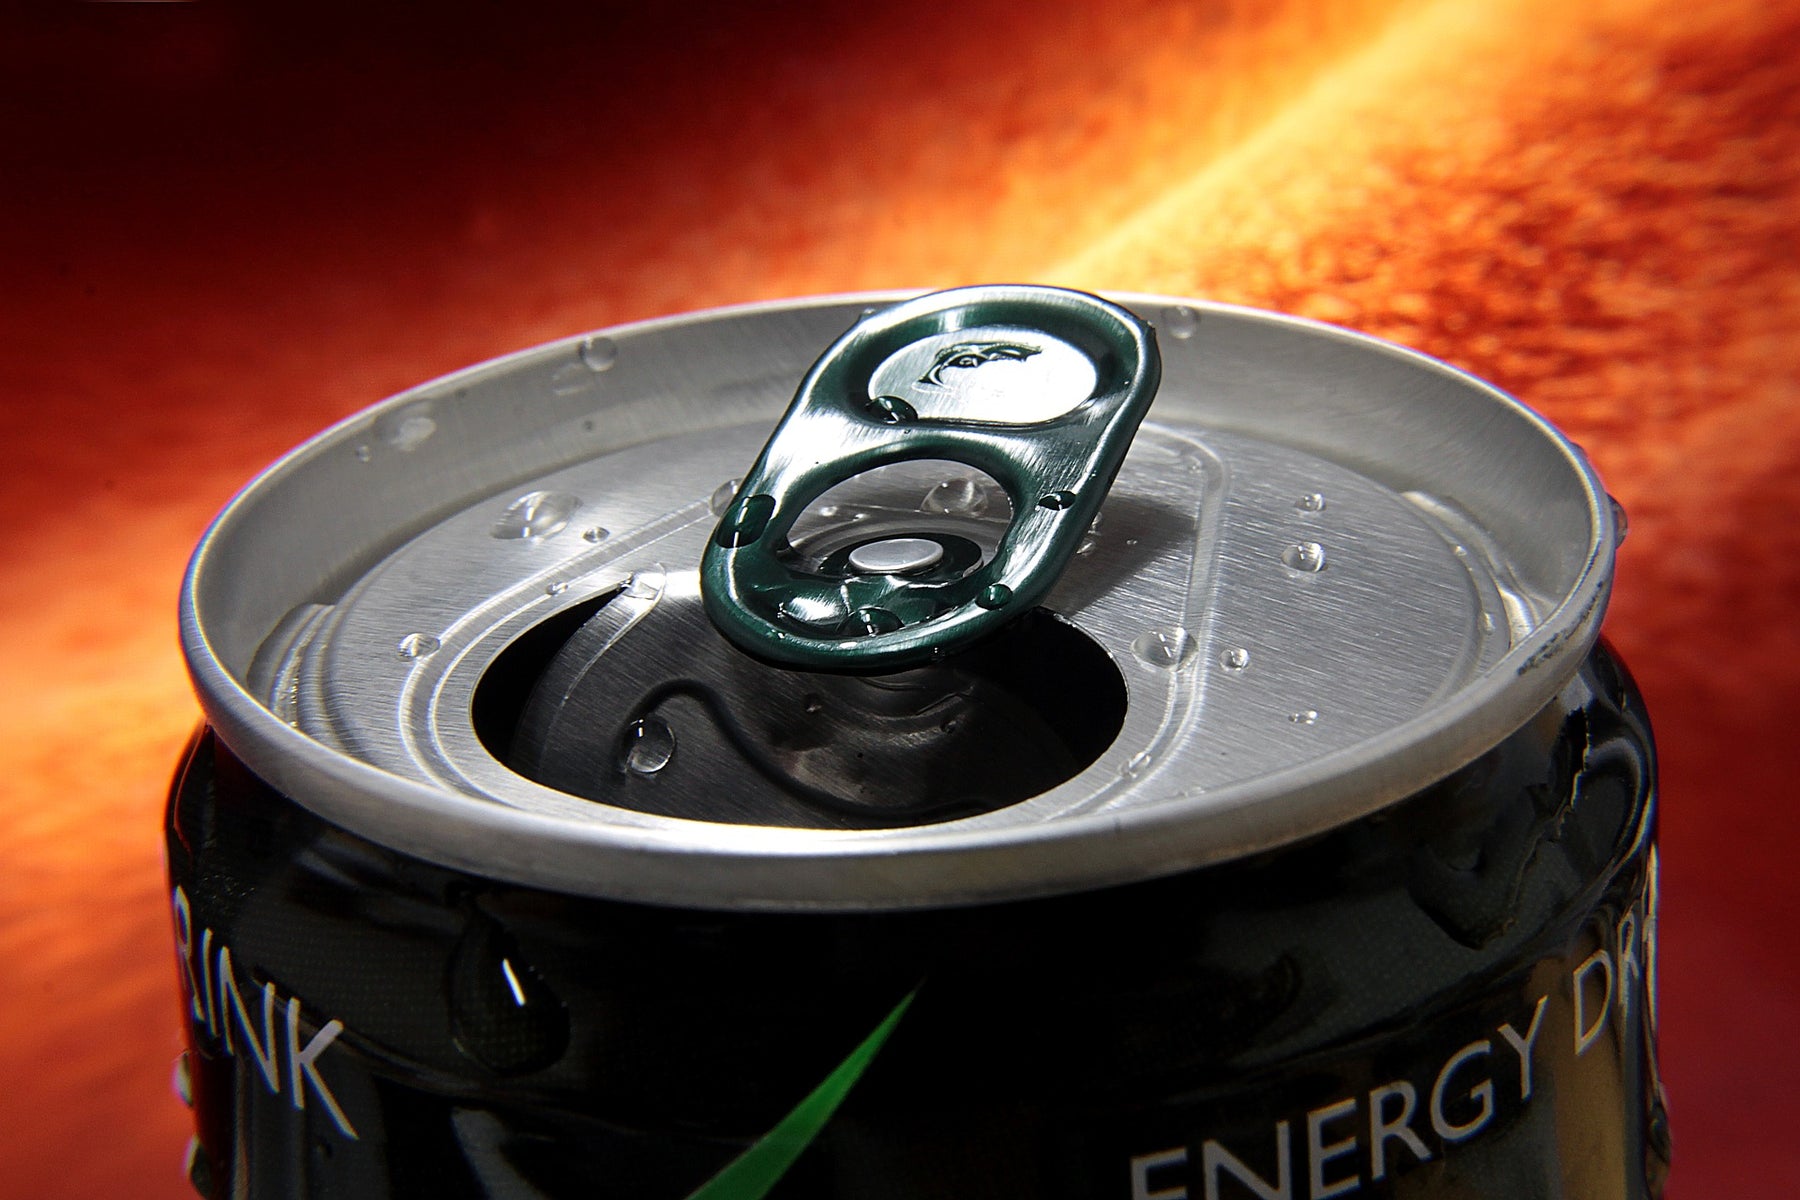 Top of an energy drink opened